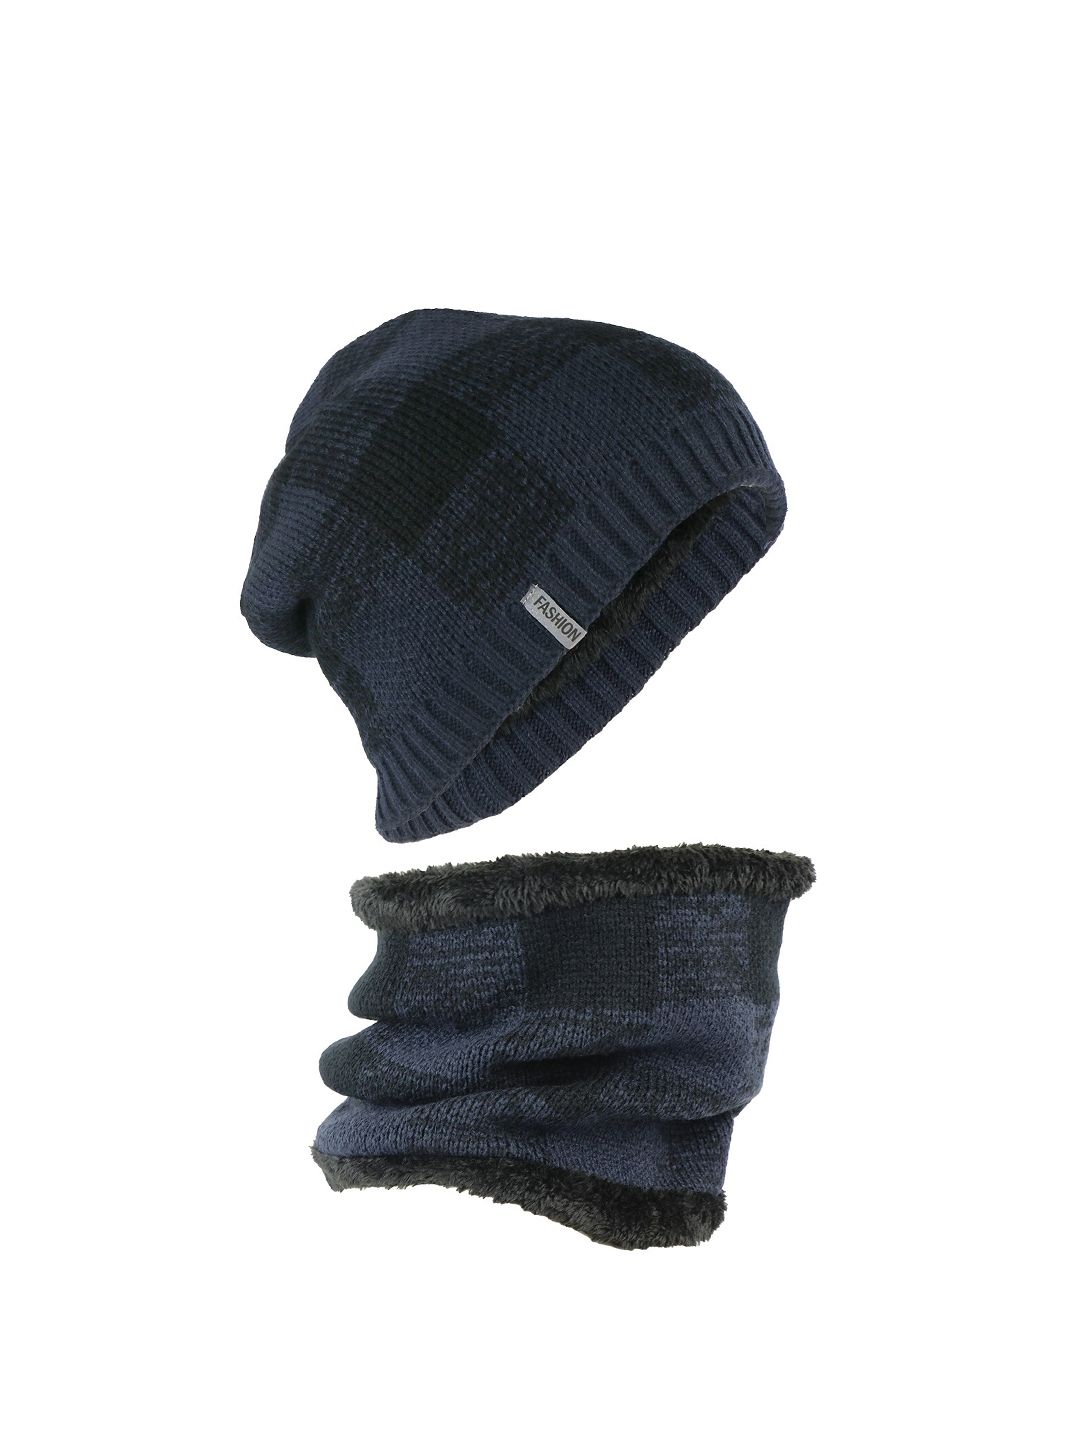 iSWEVEN Purple Woolen Beanie with Neck Warmer Price in India